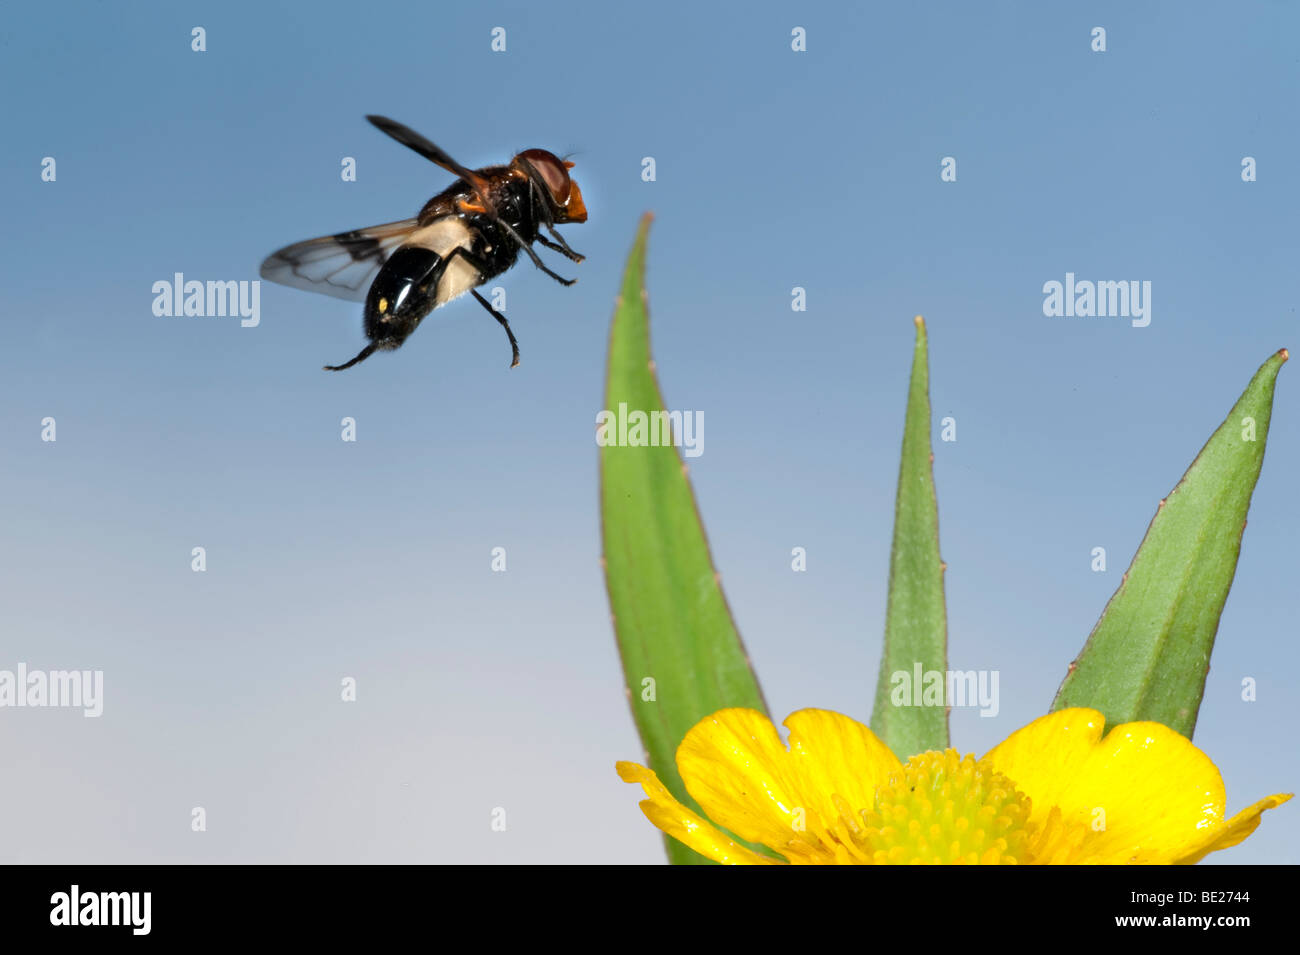 Hoverfly Volucella pellucens In flight free flying High Speed Photographic Technique Stock Photo